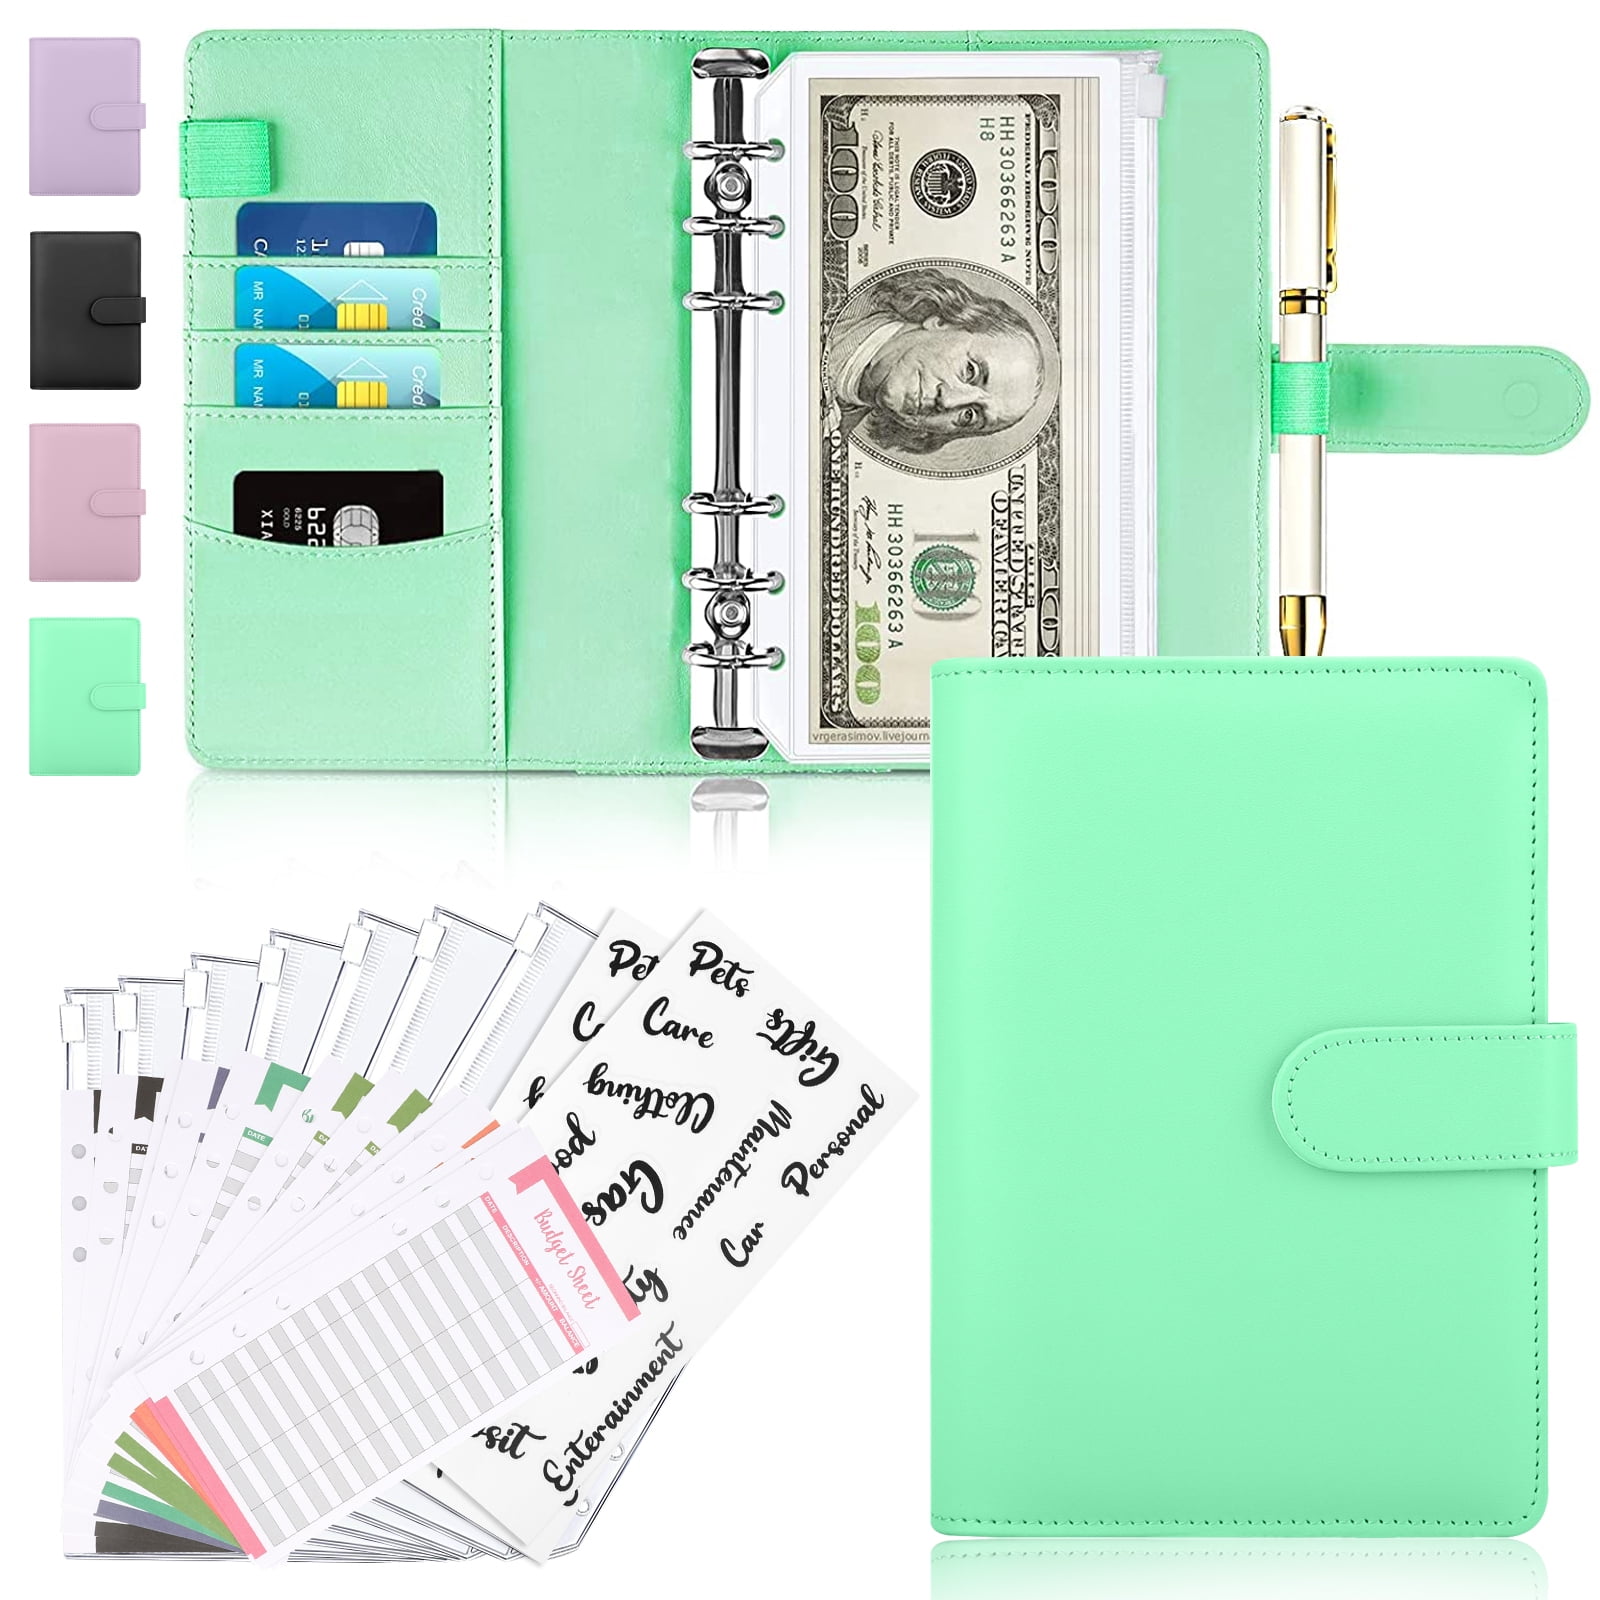 Business Notebook Notepad A6 Loose Leaf Notebook Binder Leather Padfolio Portfolio Zipped Conference Folder Meeting Writing Pad Personal Organiser with Calculator Pen Holder Documents Cards Pockets